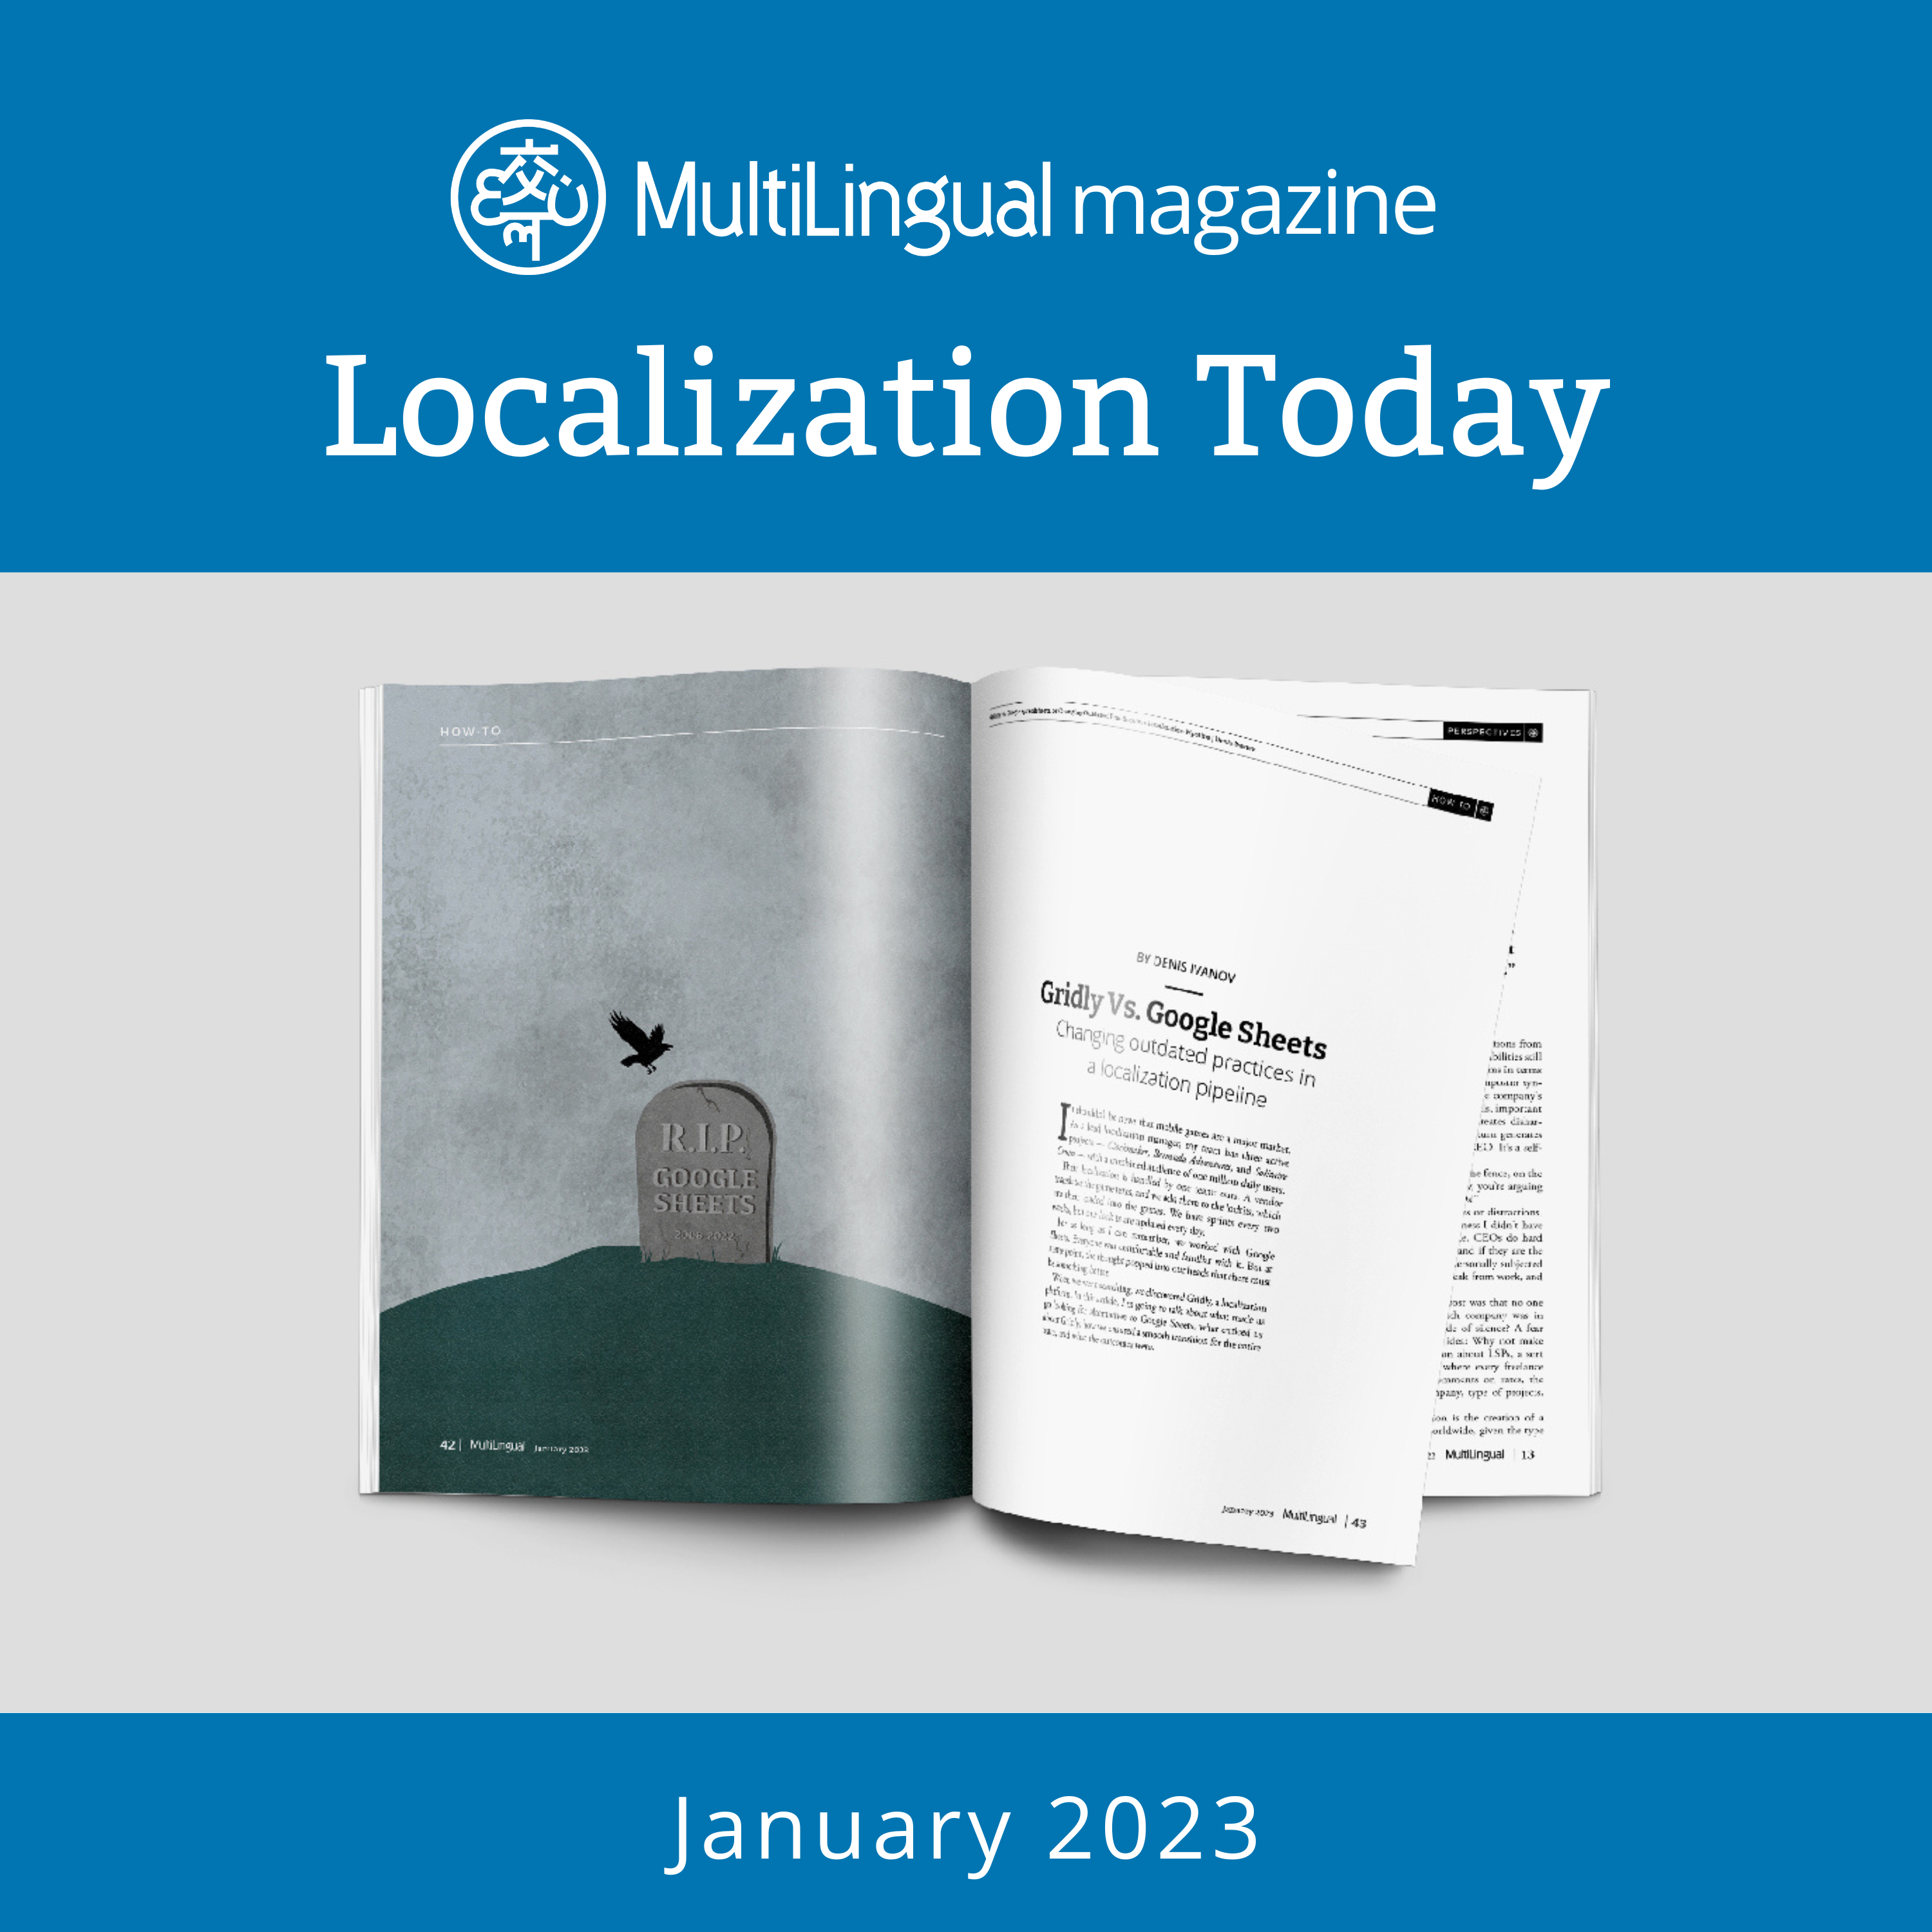 Gridly vs. Google Sheets, or Changing outdated practices in a localization pipeline | January 2023